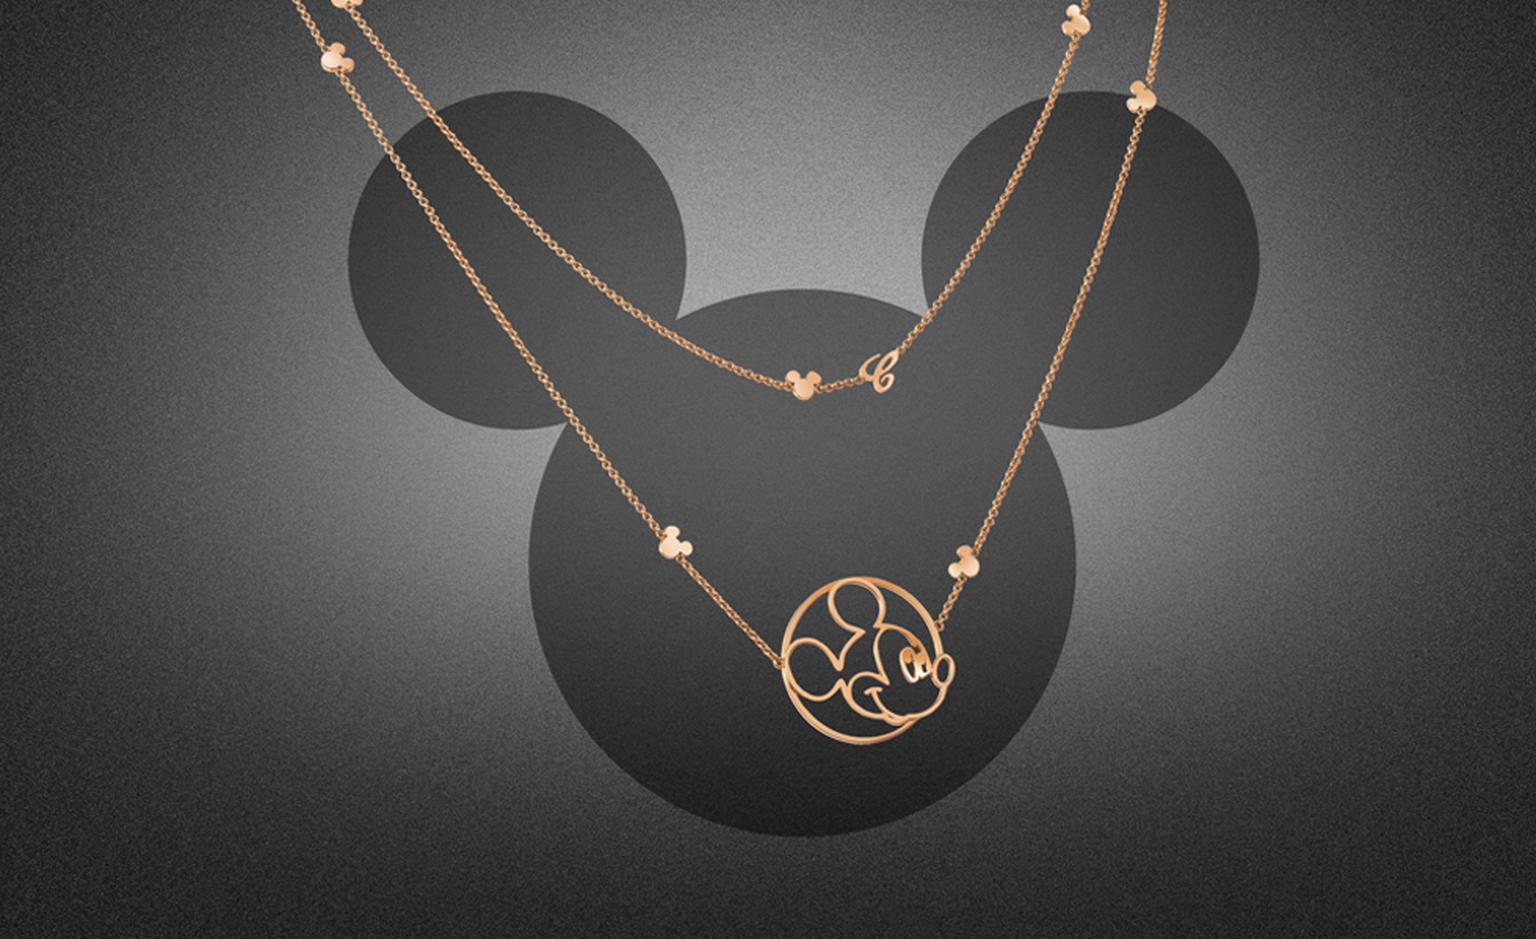 Happy Mickey long pendant. In rose or white gold with 2 mobile diamonds and a Mickey Mouse silhouette. Price from £3,840